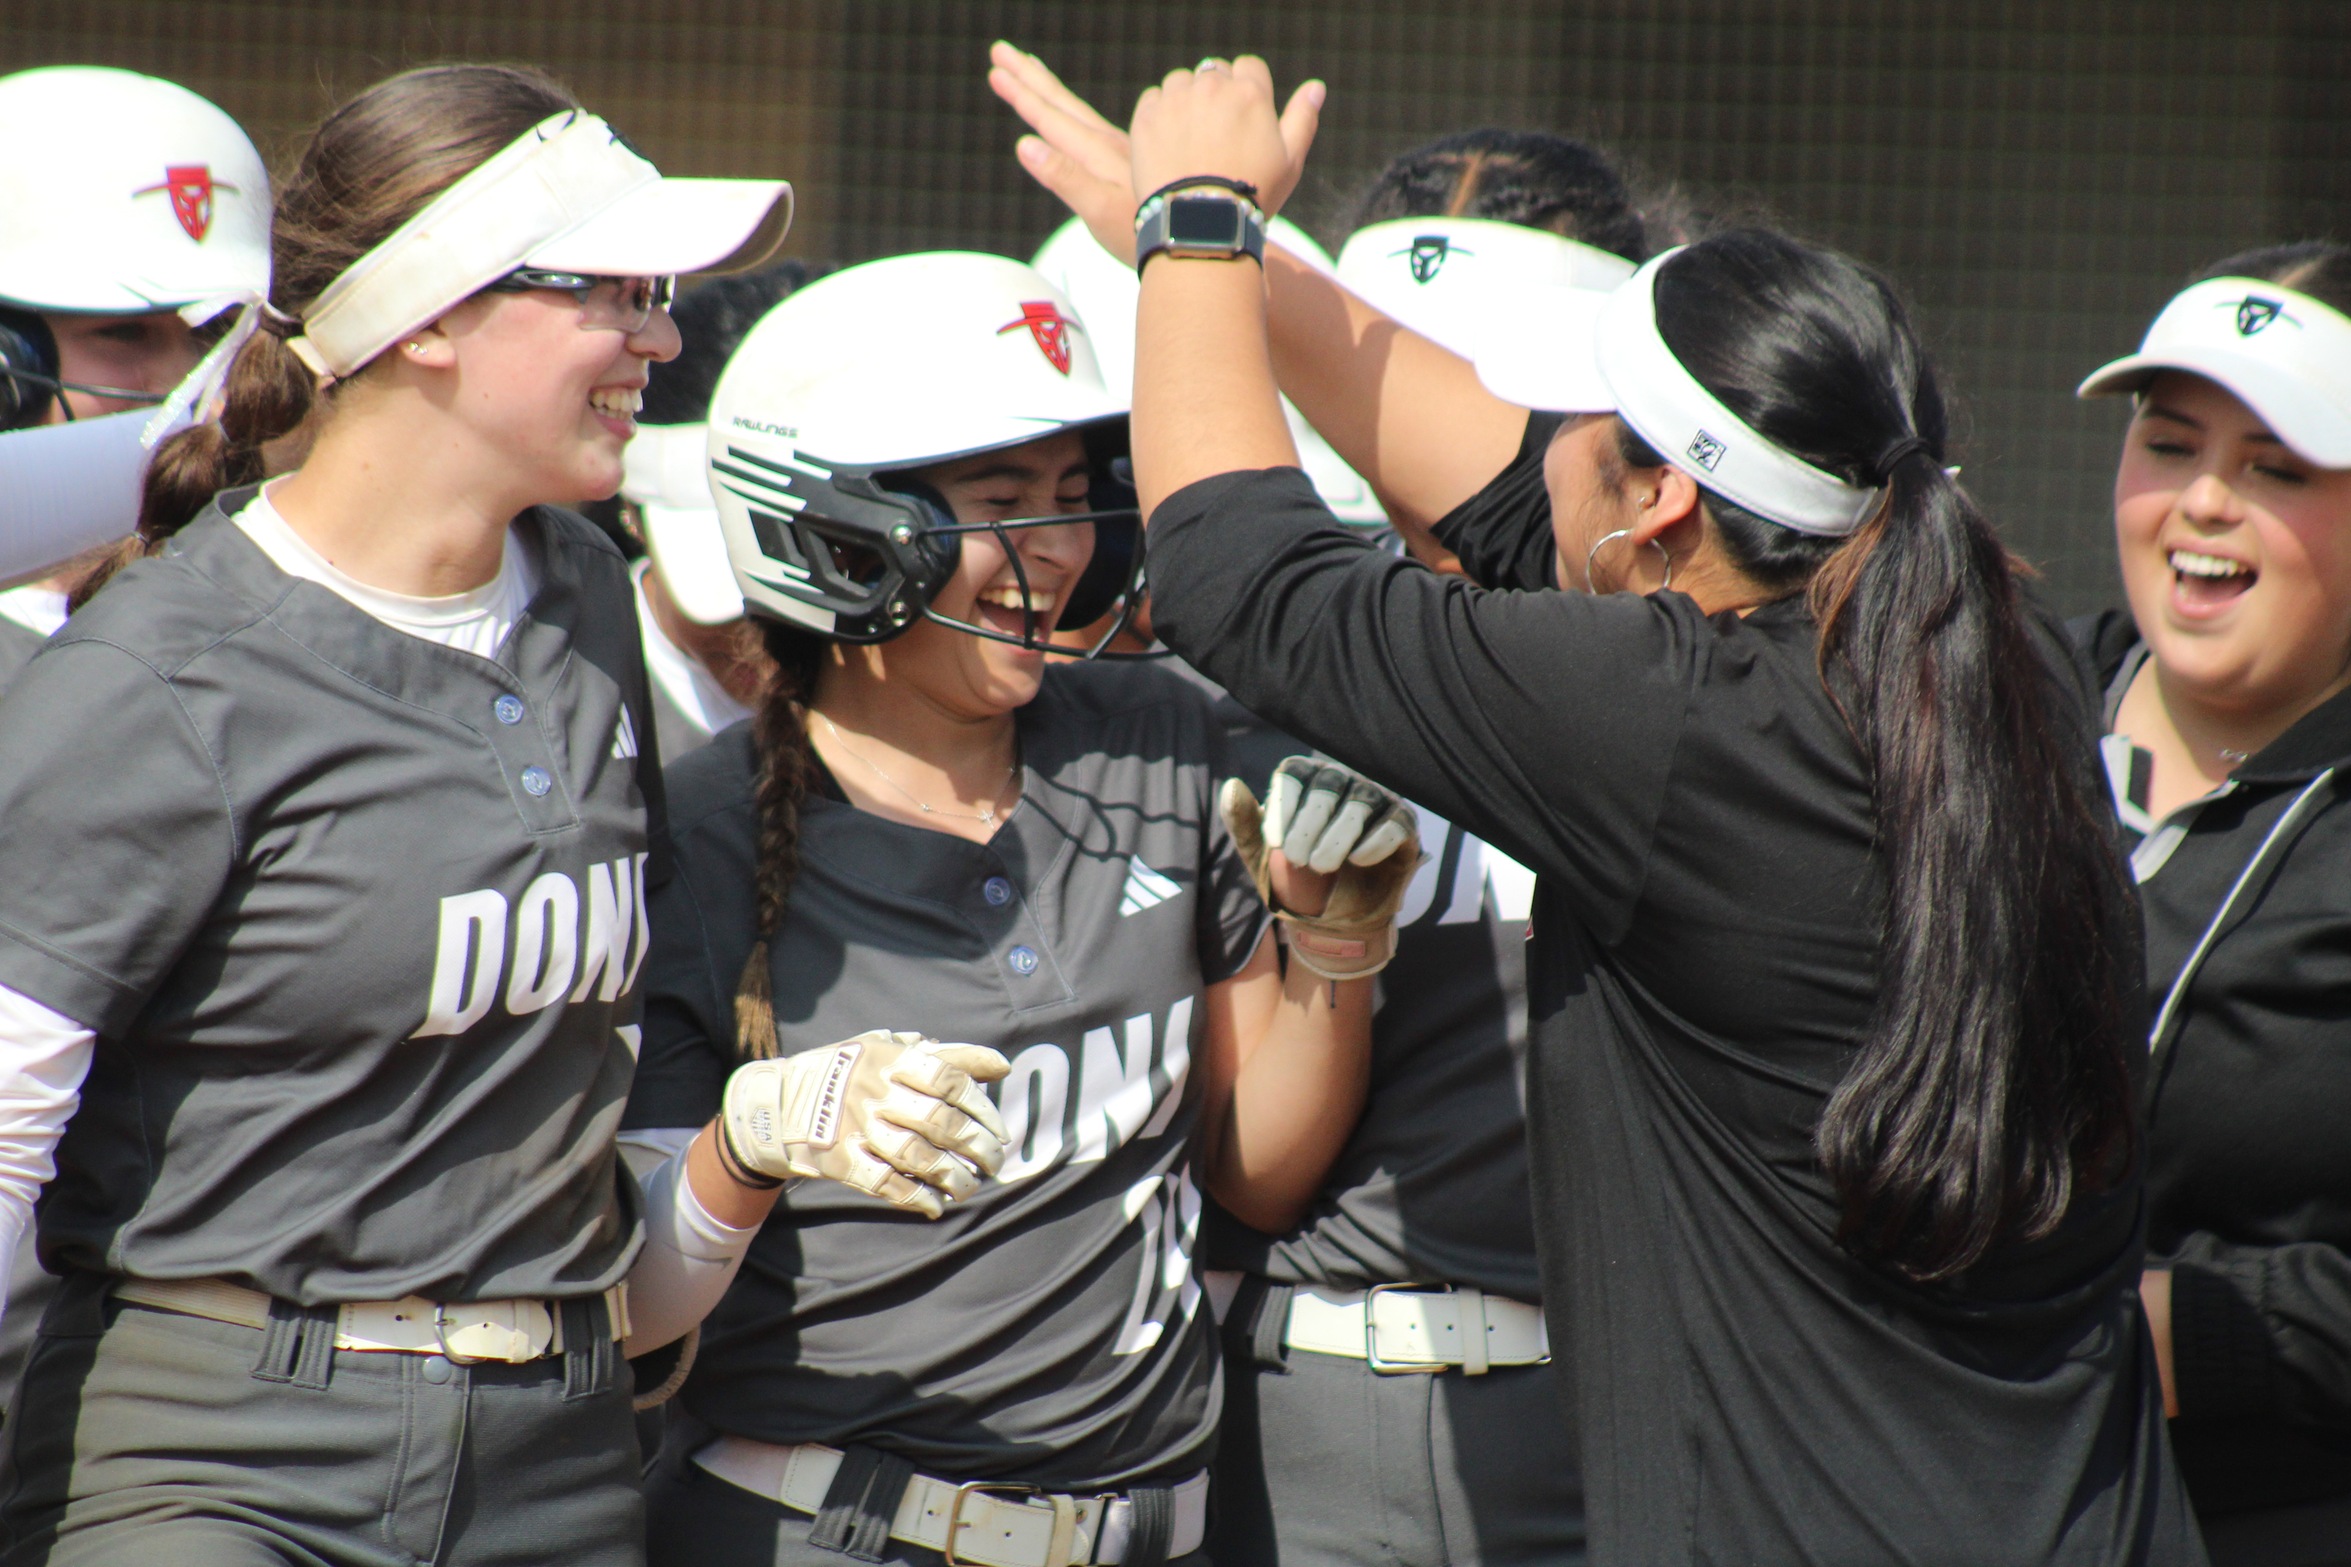 Avila Executes Late as Dons get Walk-Off Win Over Saddleback